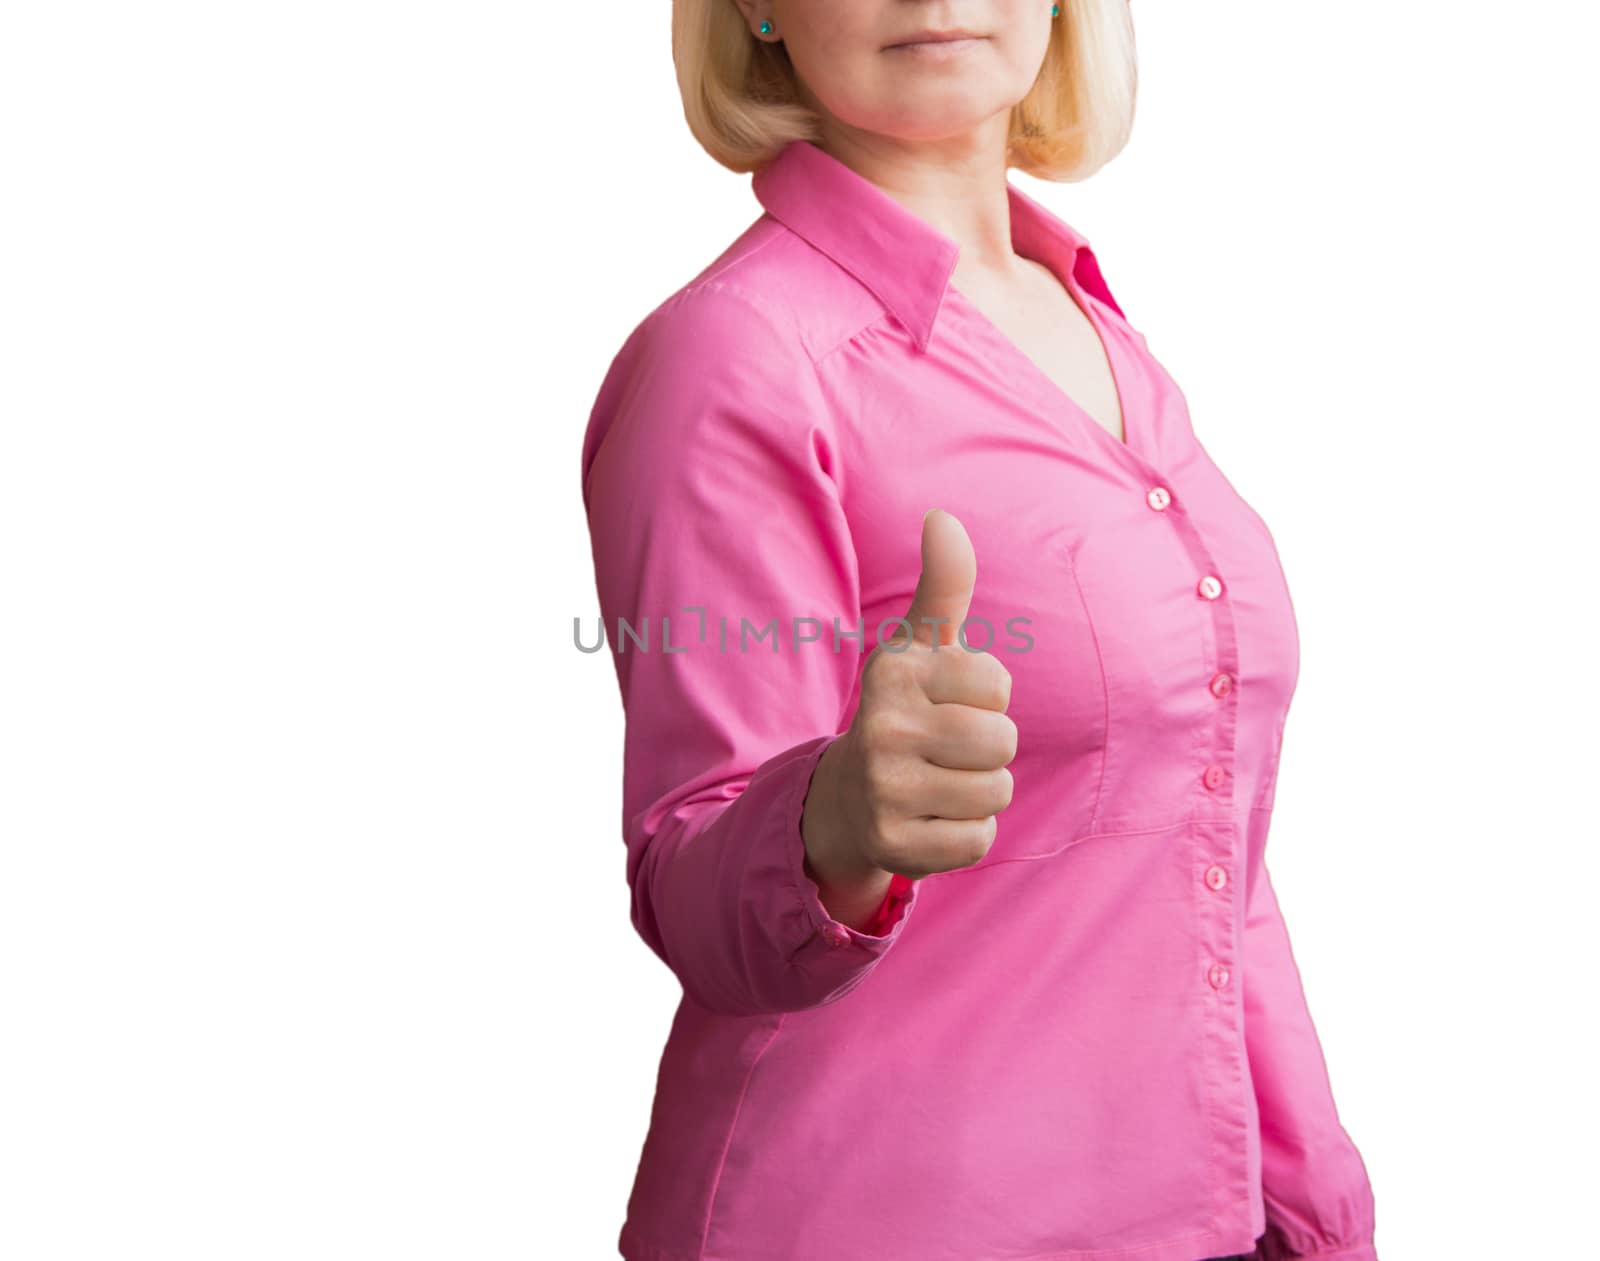 Successful blonde business woman showing thumbs up sign isolated closeup.